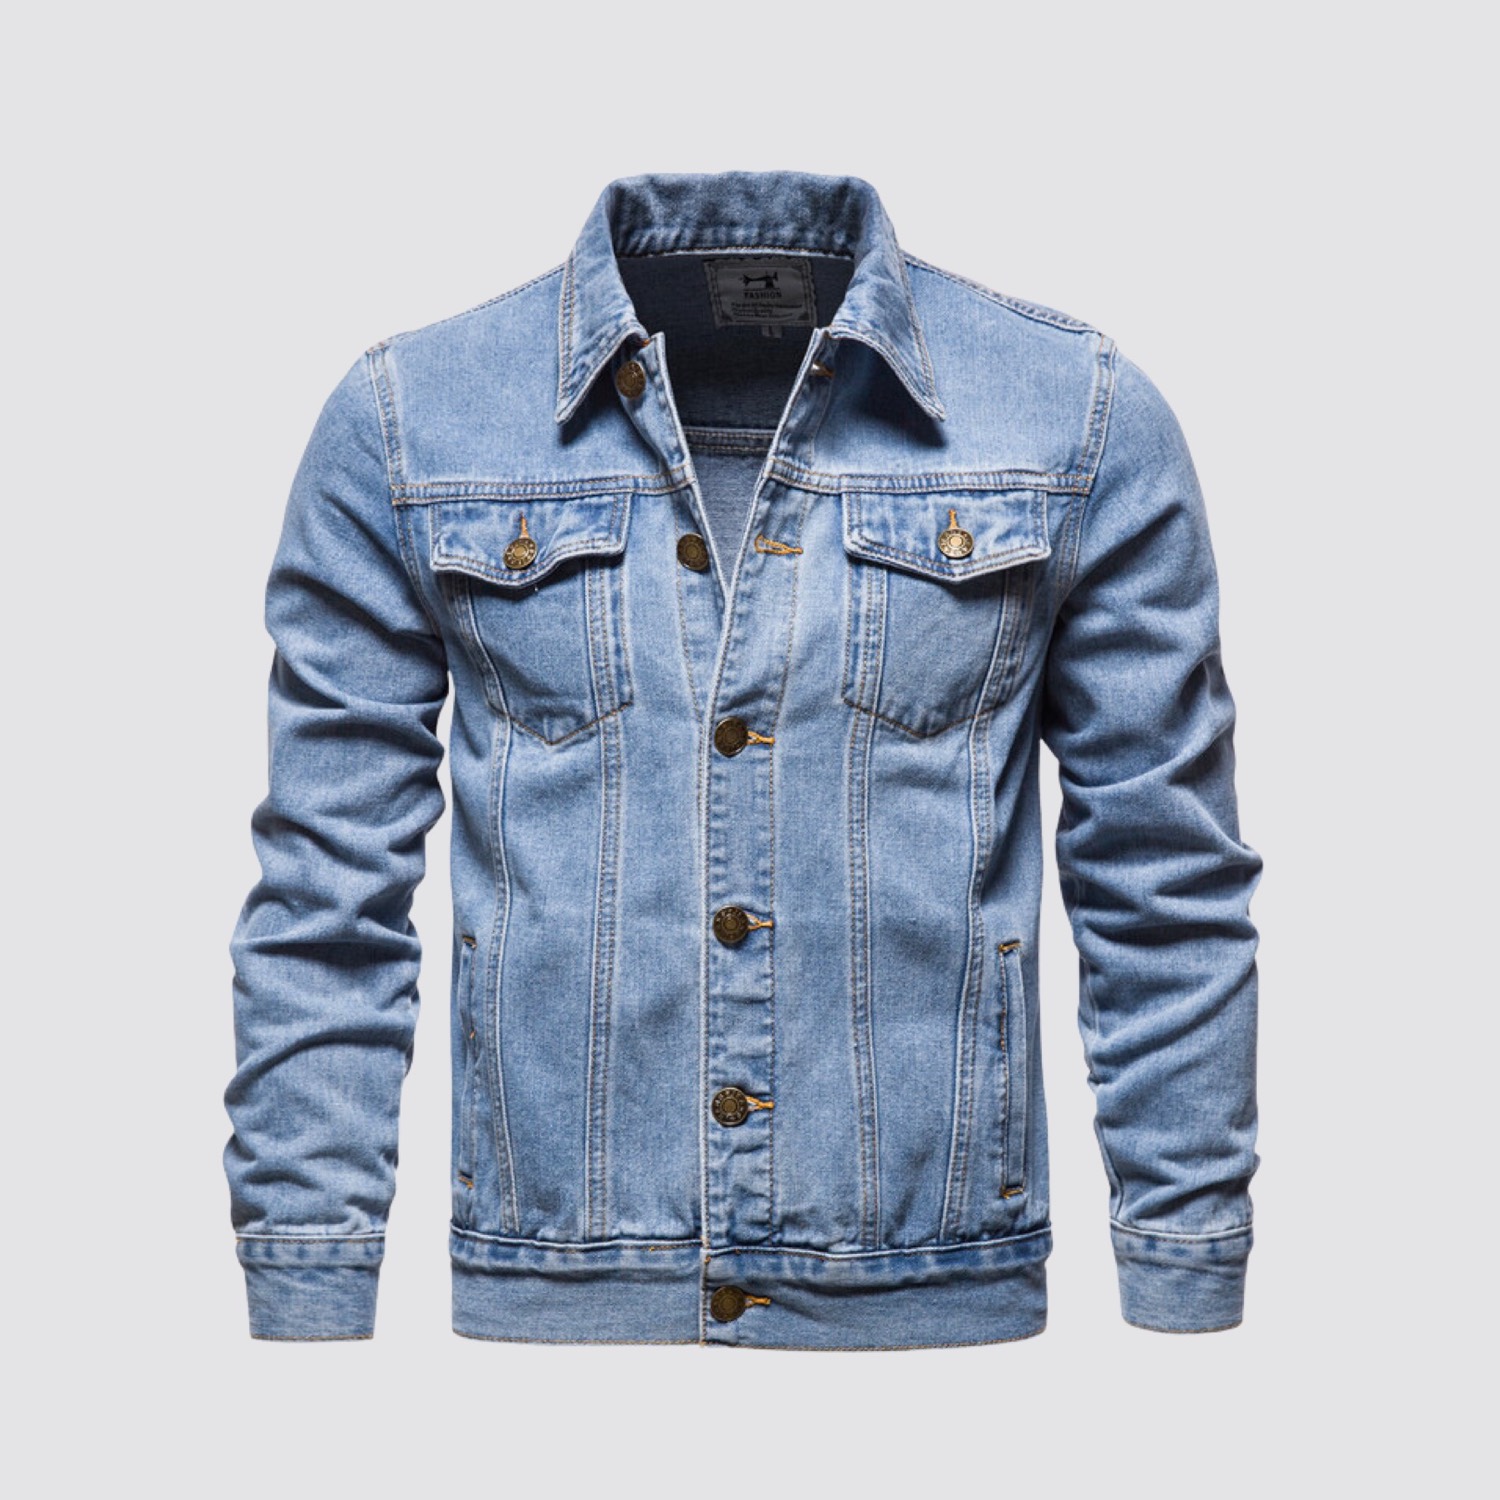 How to find a denim jacket supplier - Quora